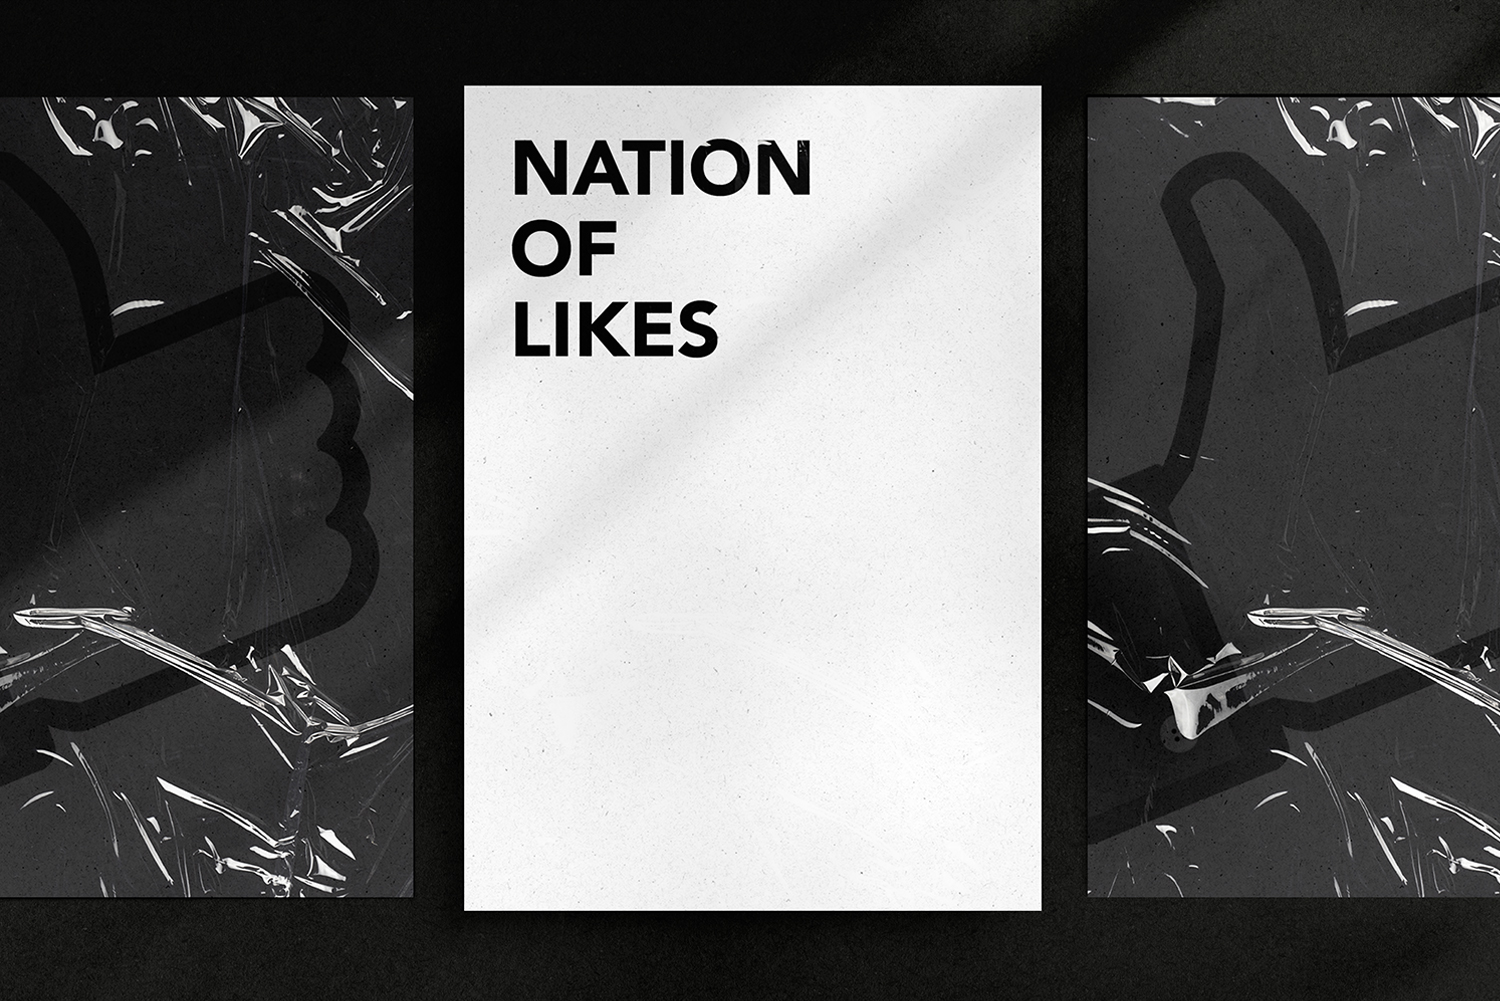 Nation of likes